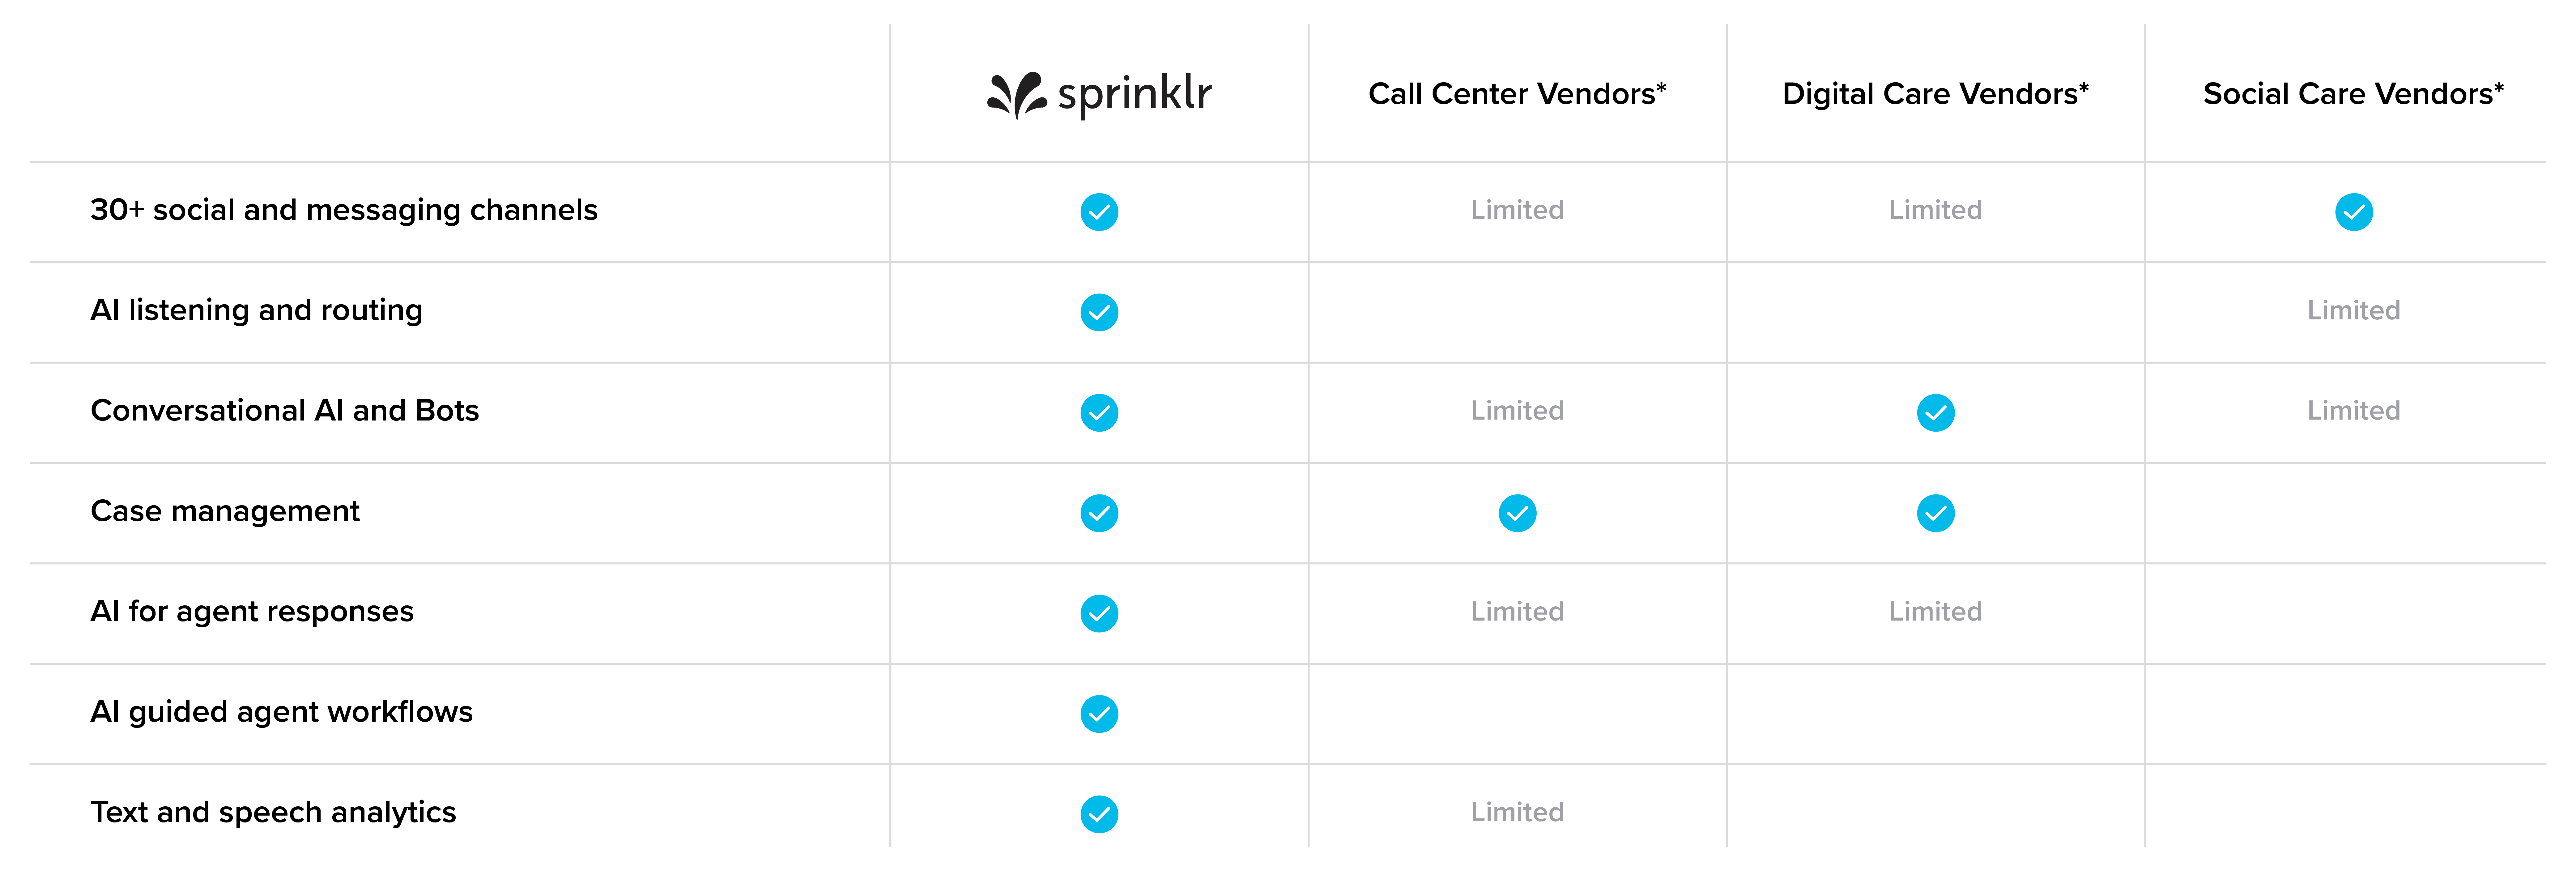 An image showing how Sprinklr's AI capabilities have an edge over its competitors